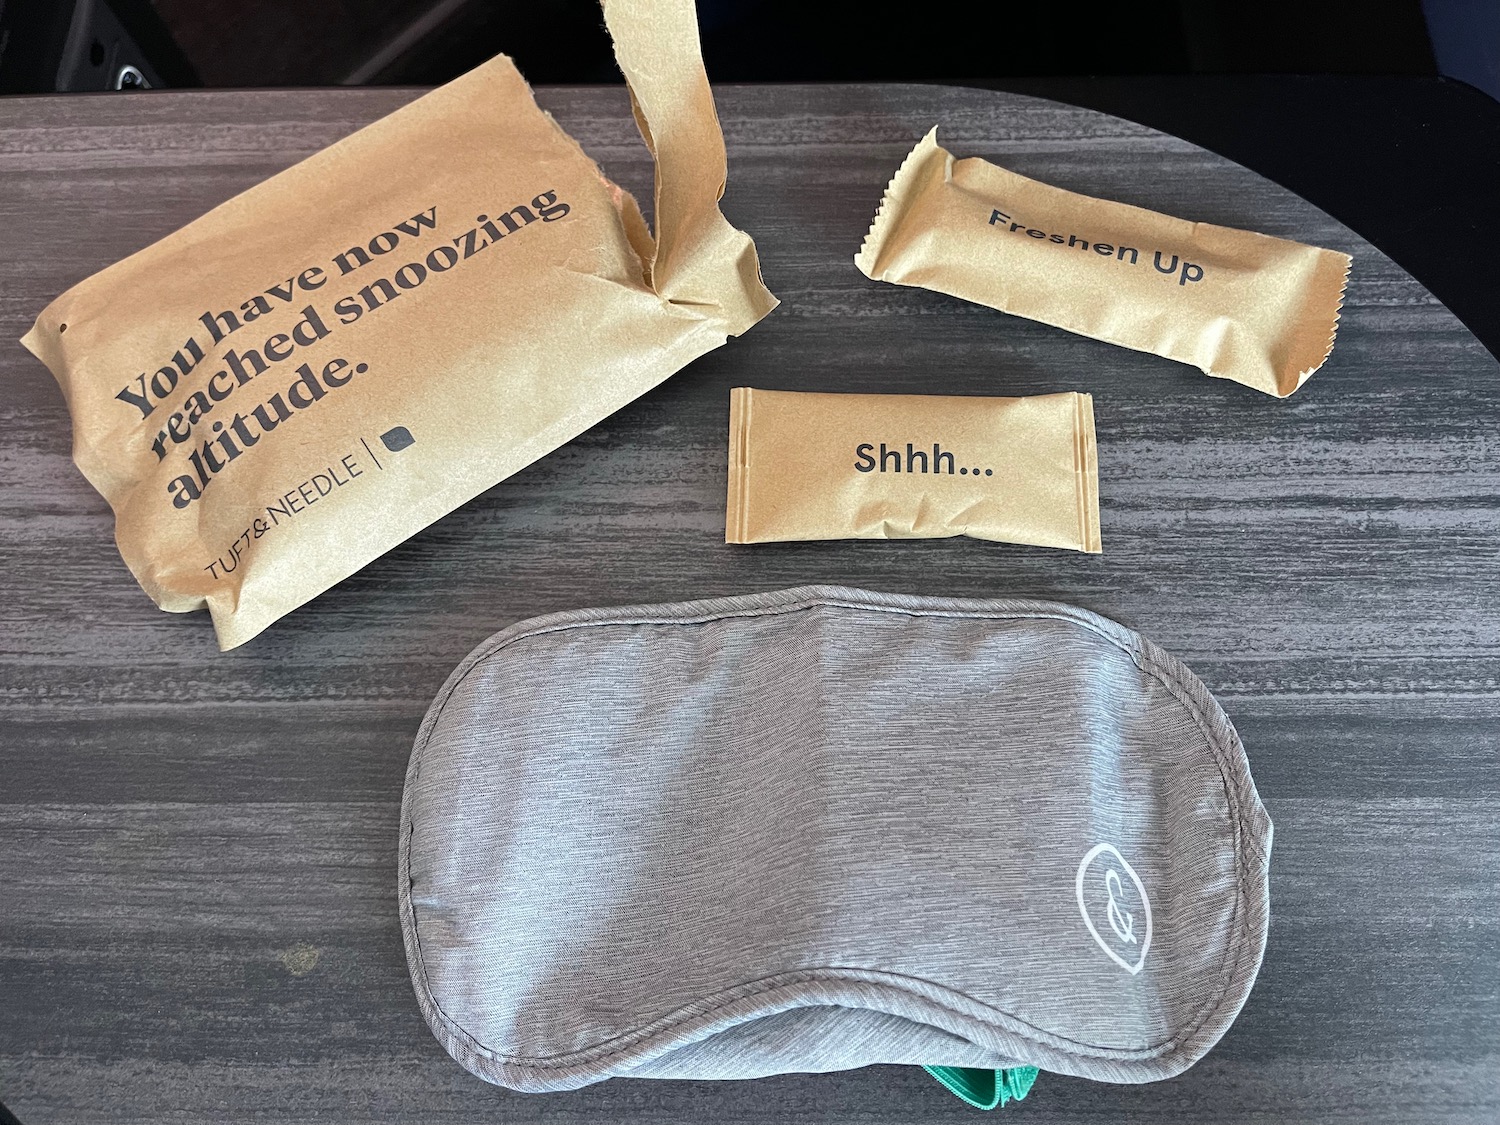 a group of brown packages next to a sleeping mask